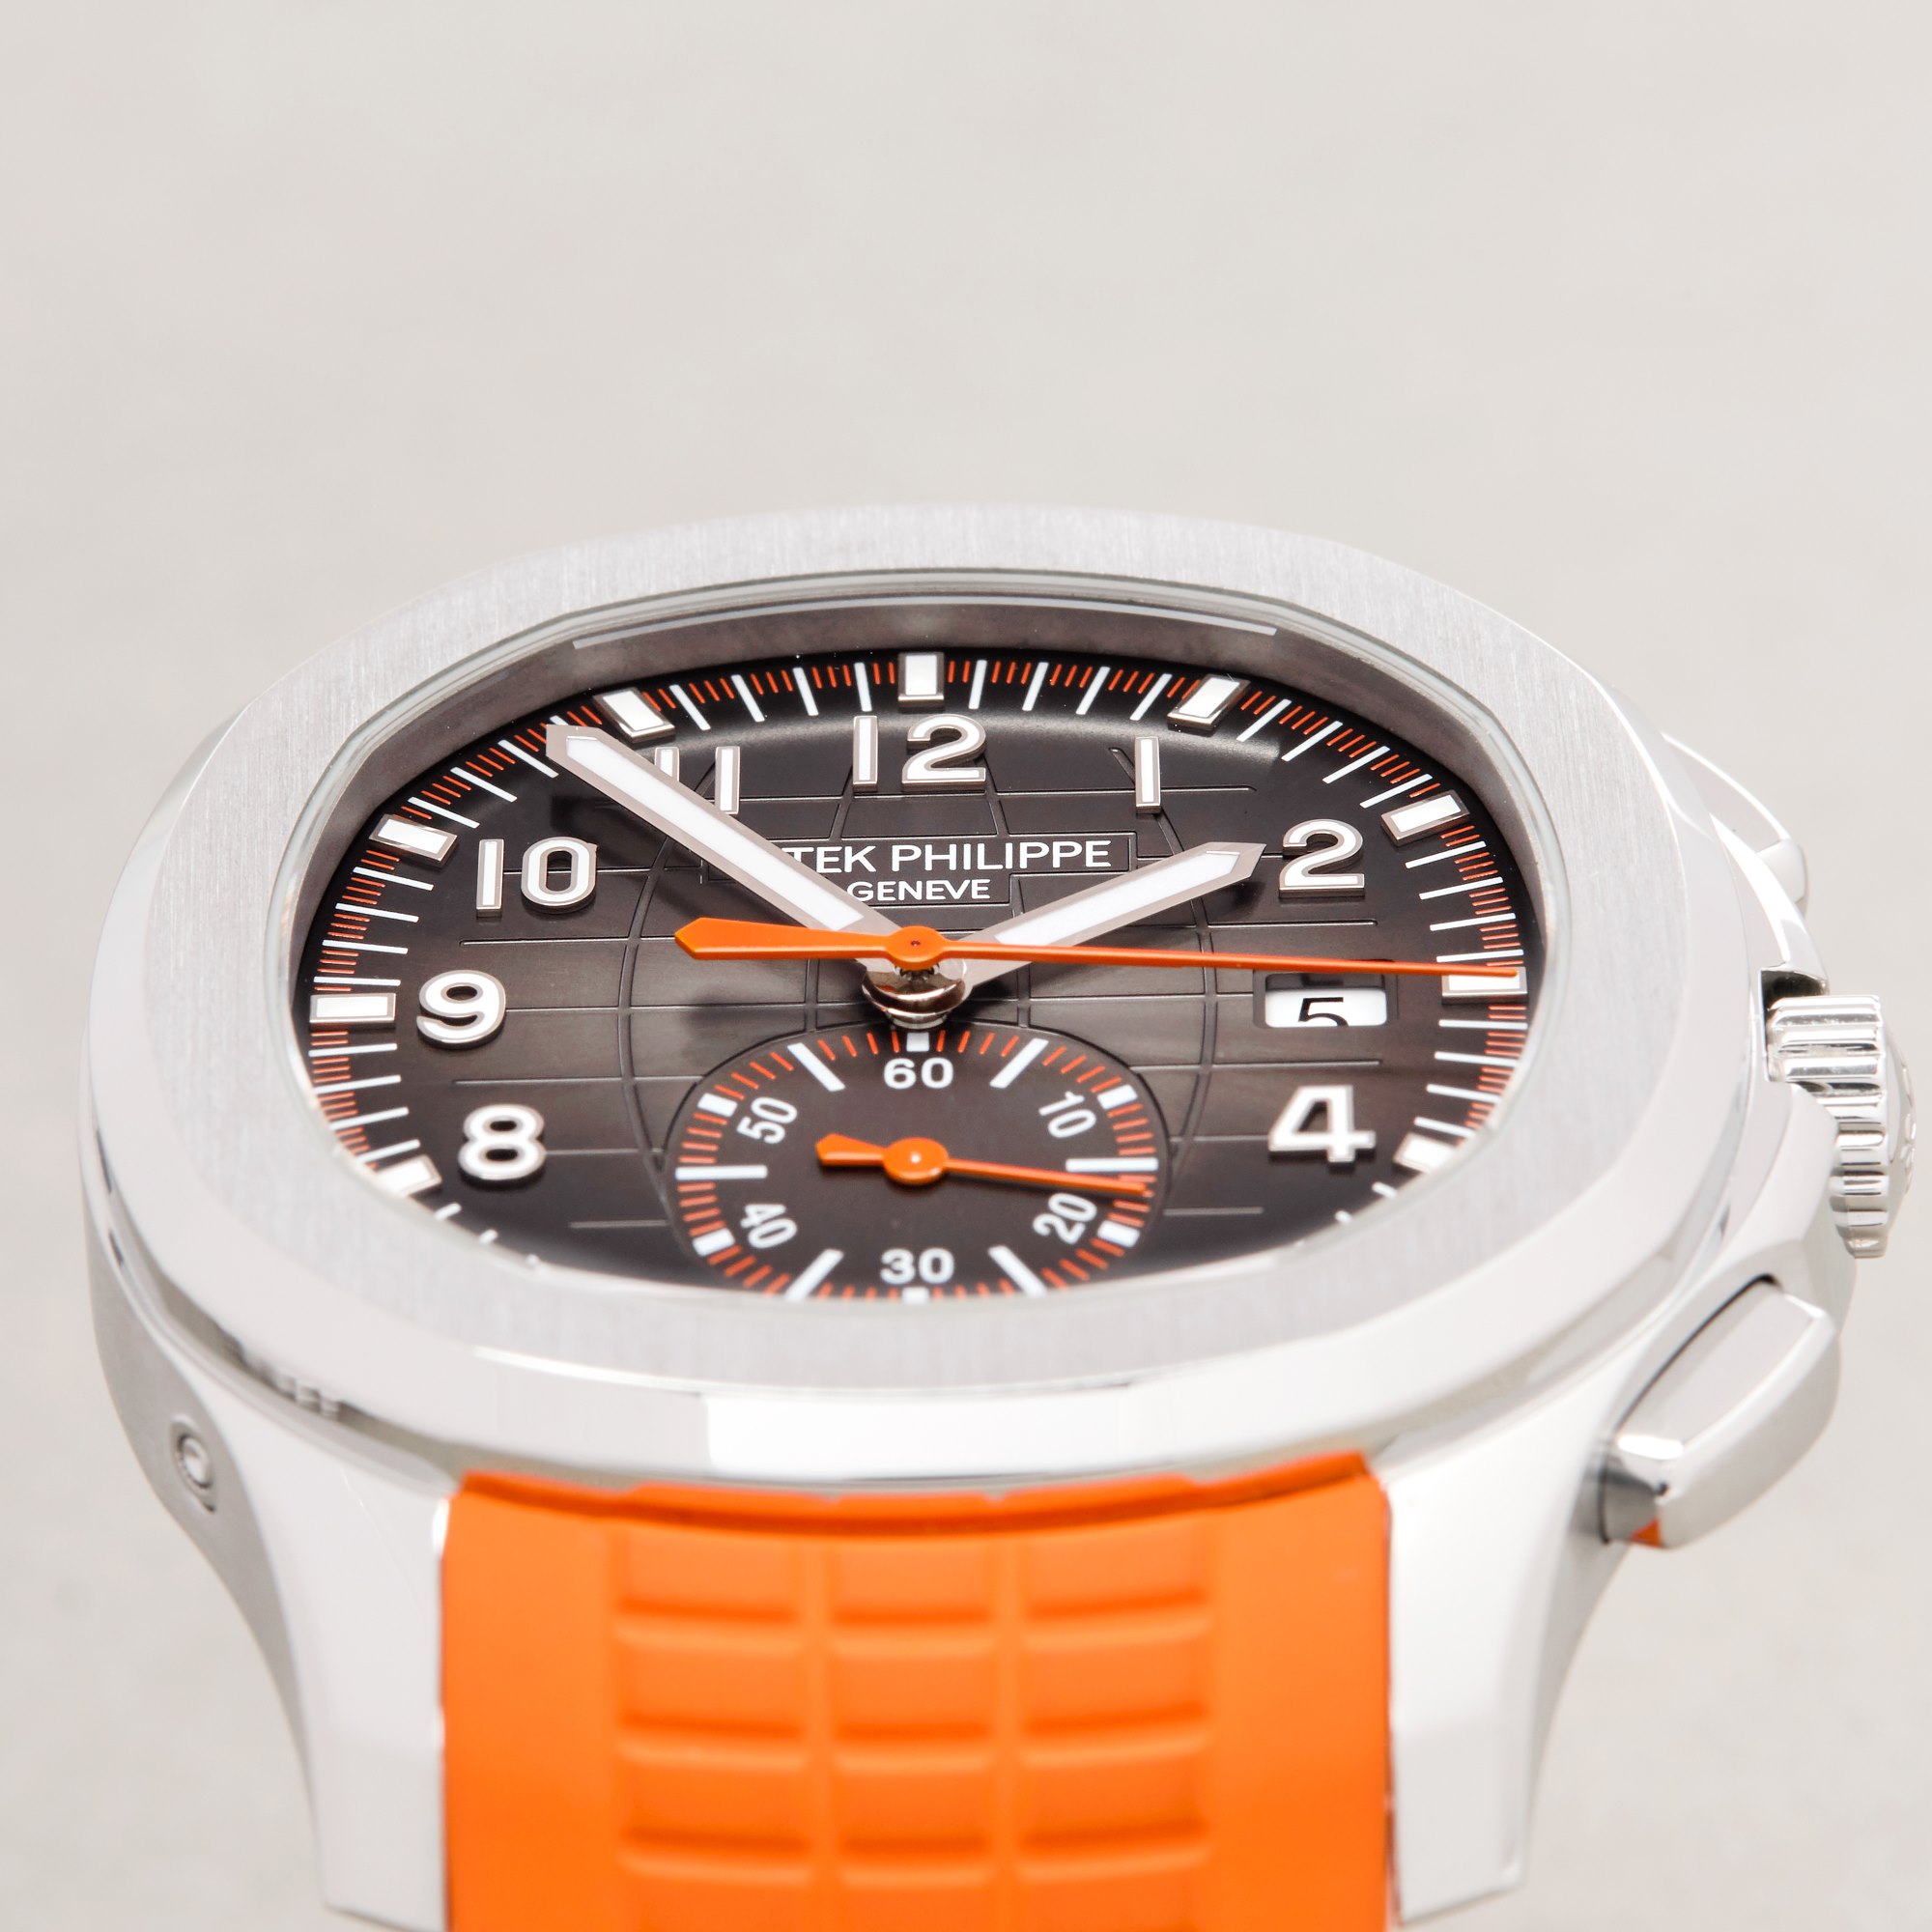 Patek Philippe Aquanaut Chronograph Stainless Steel 5968A-001